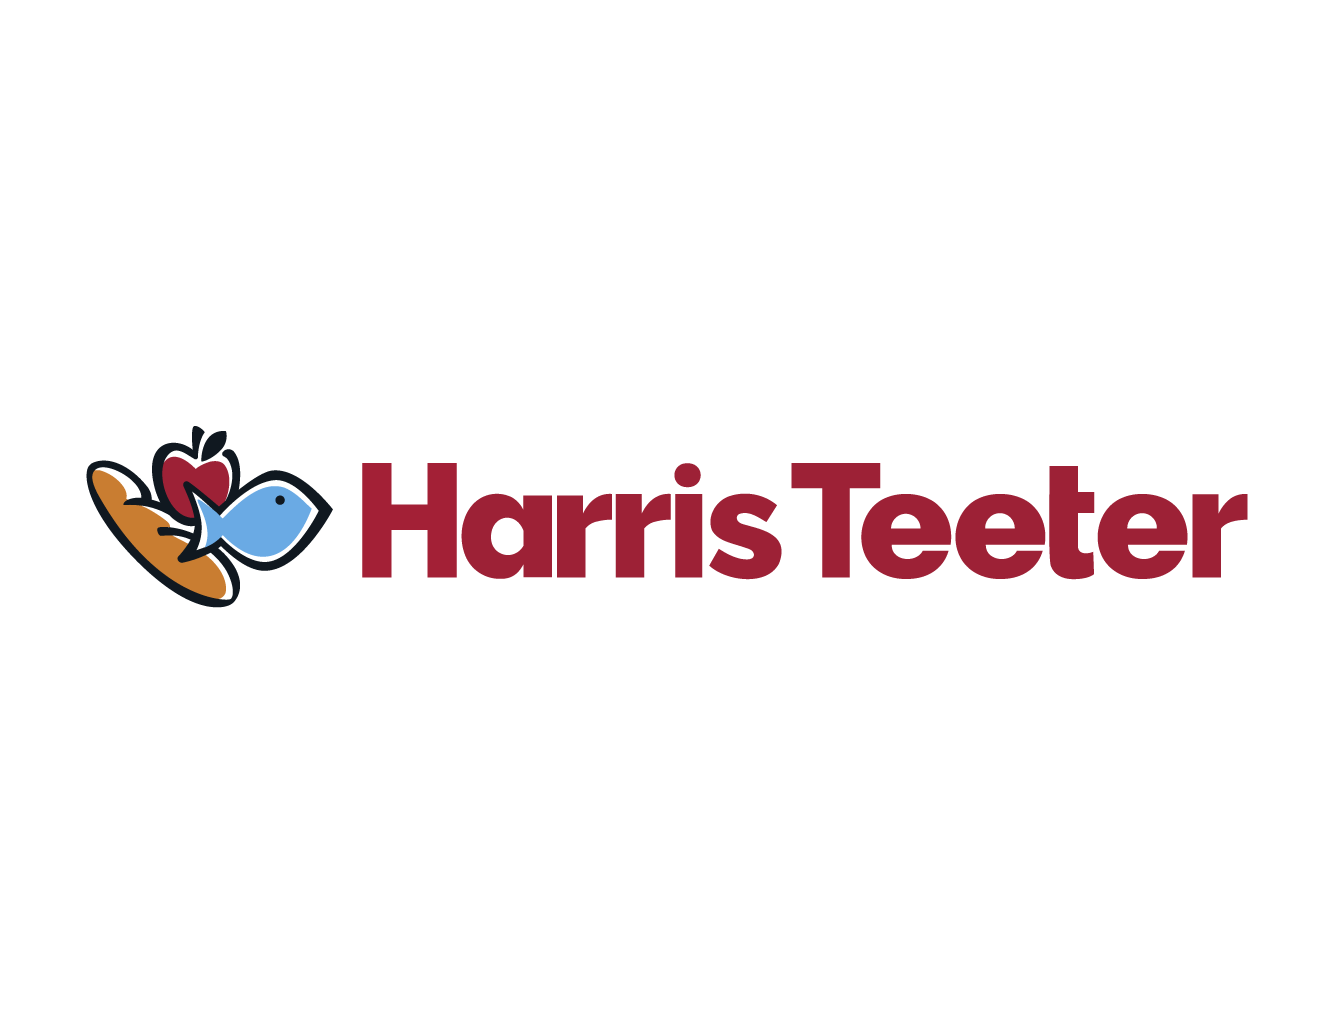 Download Harris Teeter Logo PNG and Vector (PDF, SVG, Ai, EPS) Free